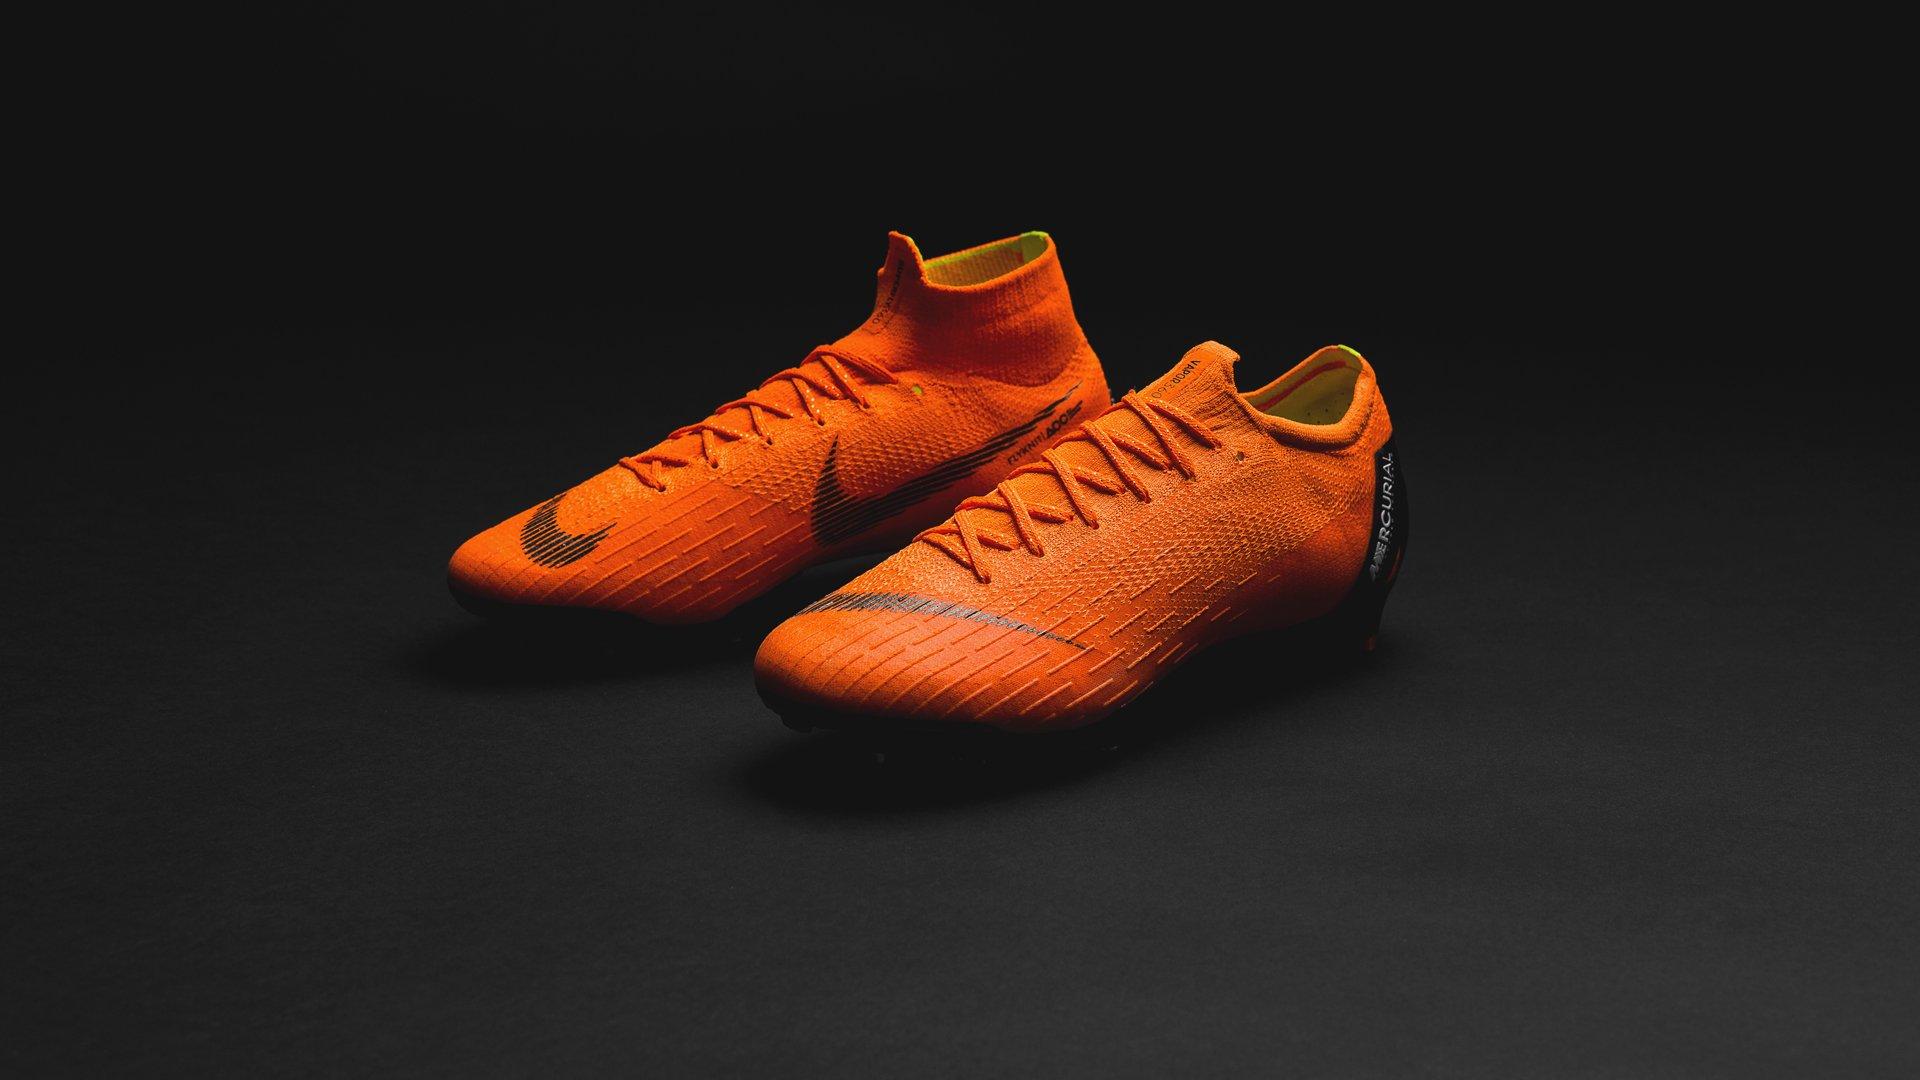 Nike unveils the Mercurial 360